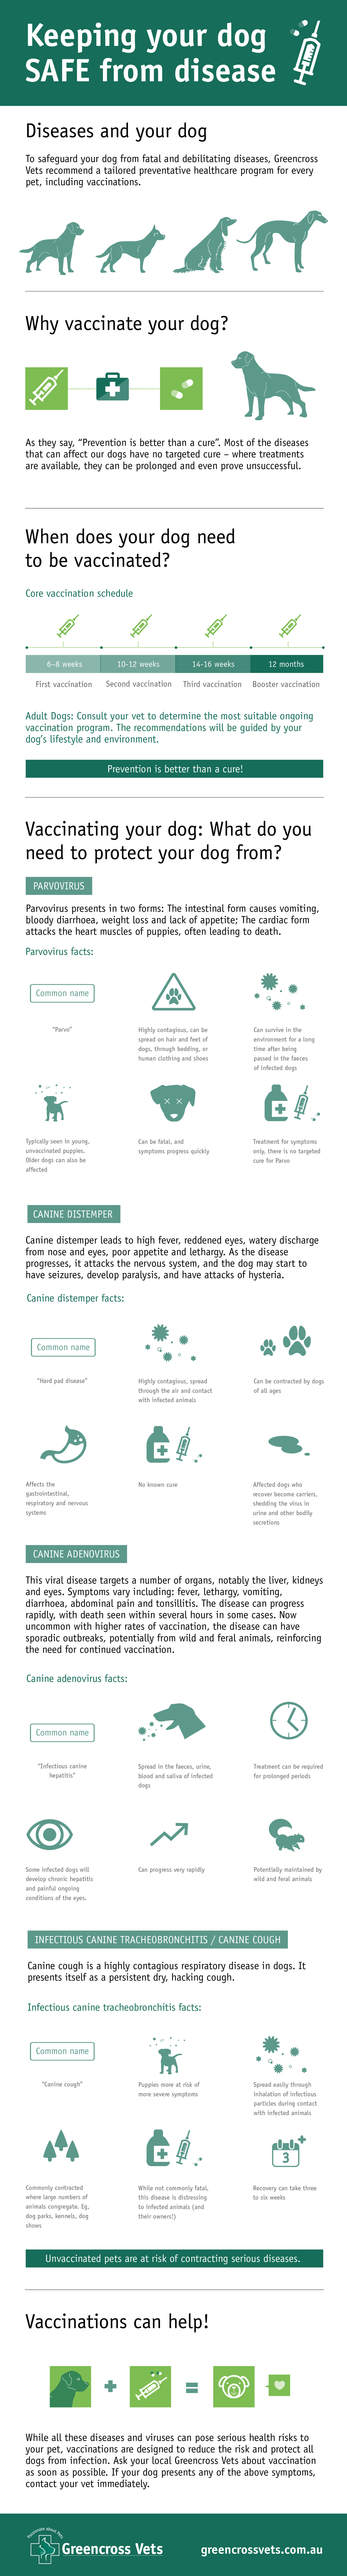 Infographic on keeping your dog disease free